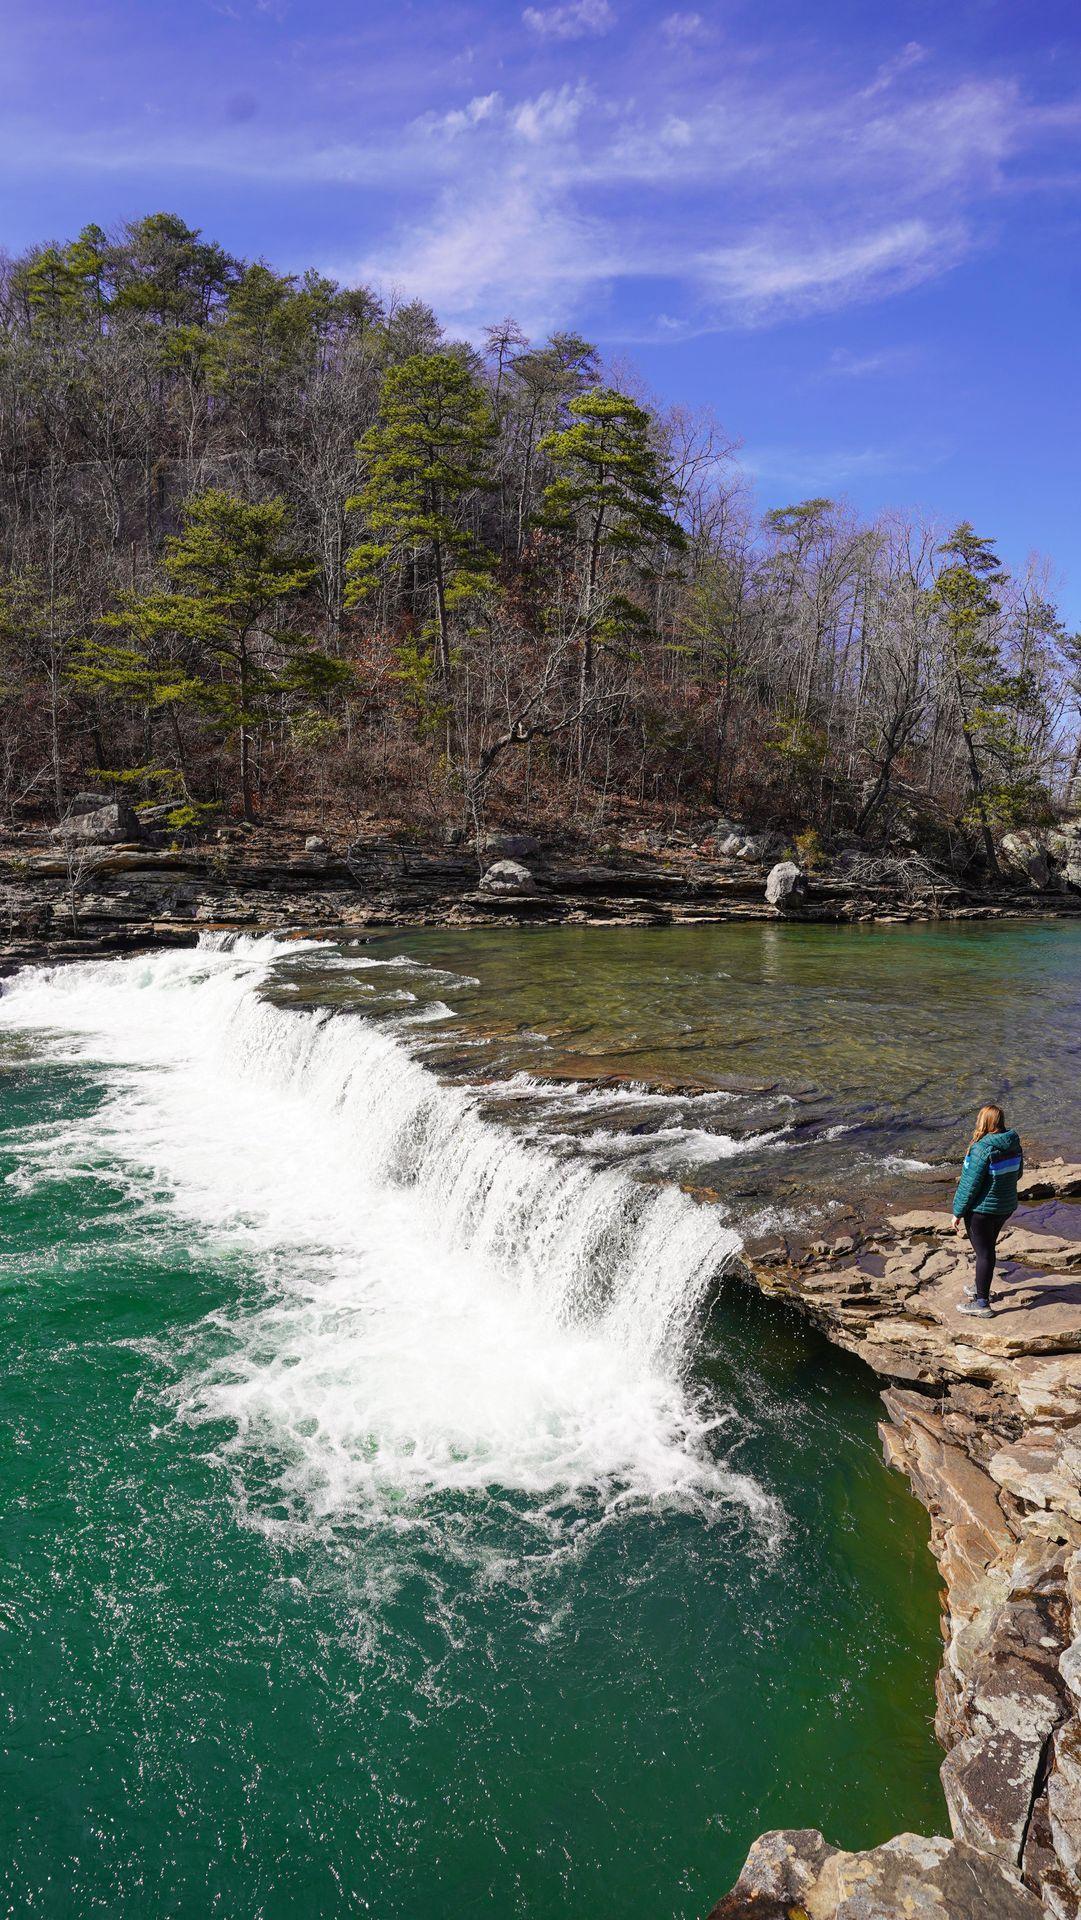 Did you know that Alabama had so many waterfalls?